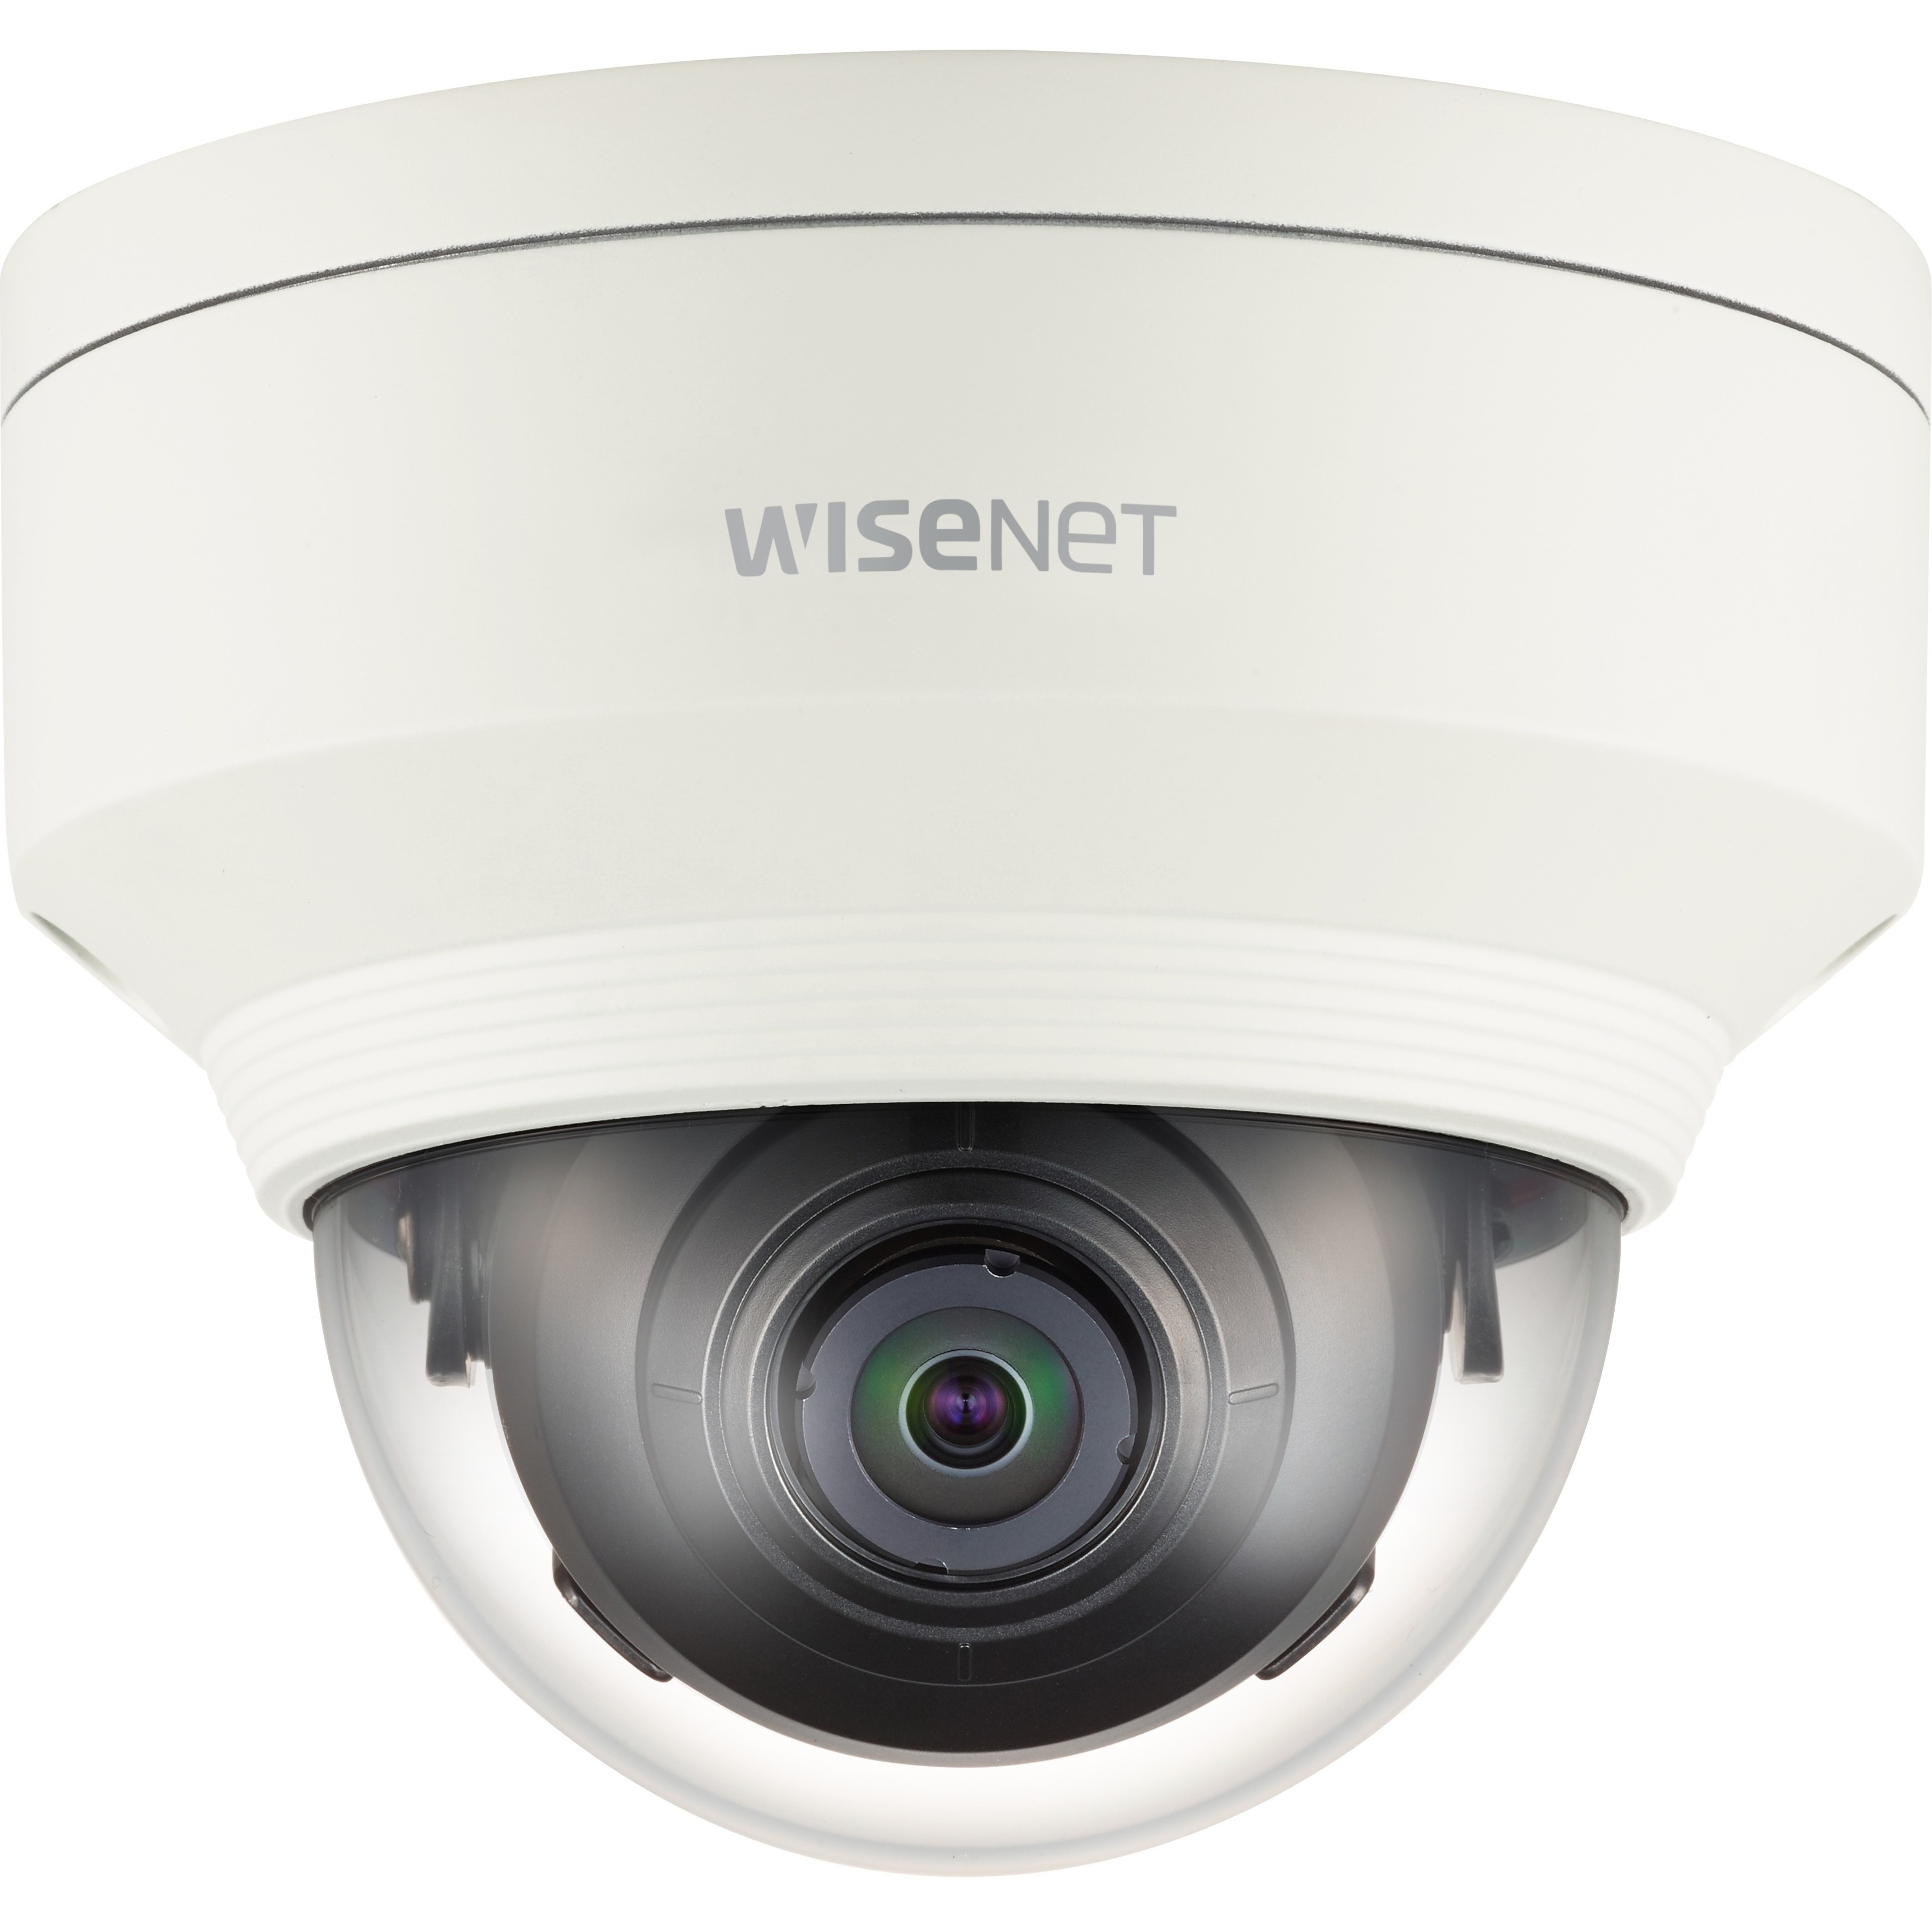 Wisenet XNV-6010 2 Megapixel Outdoor Full HD Network Camera, Monochrome, Color, Dome, Ivory - image 2 of 3